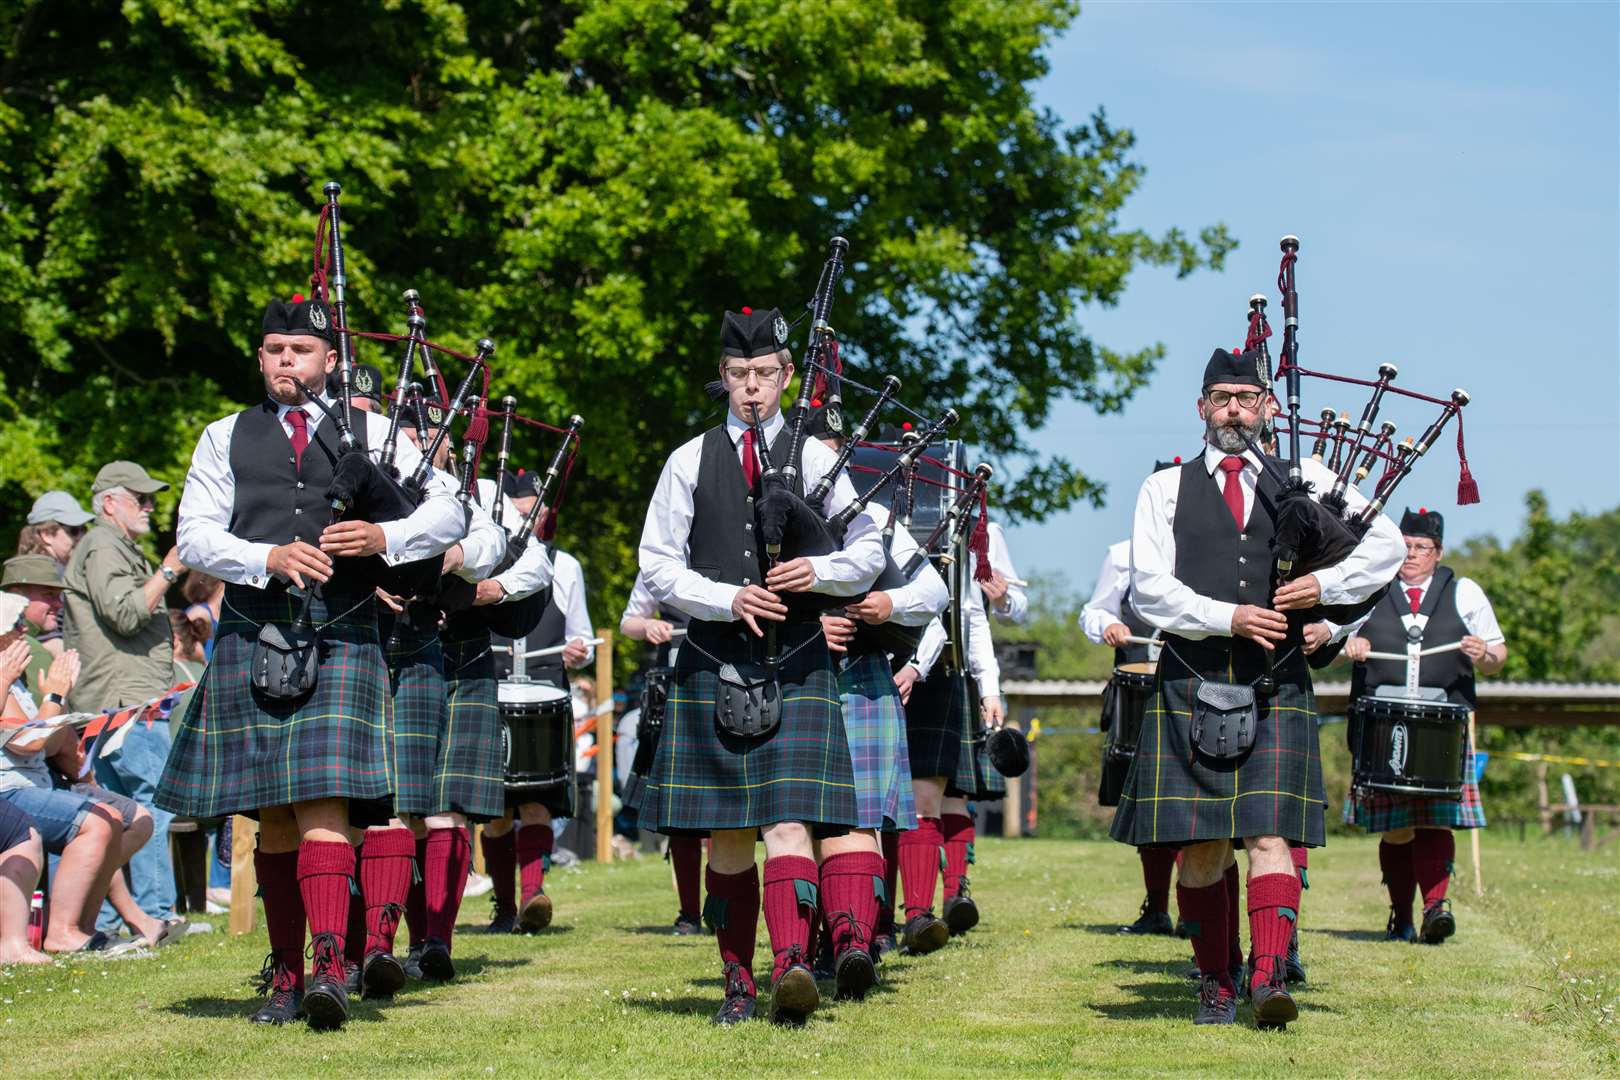 The Portsoy Pipe Band will form part of the massed bands.